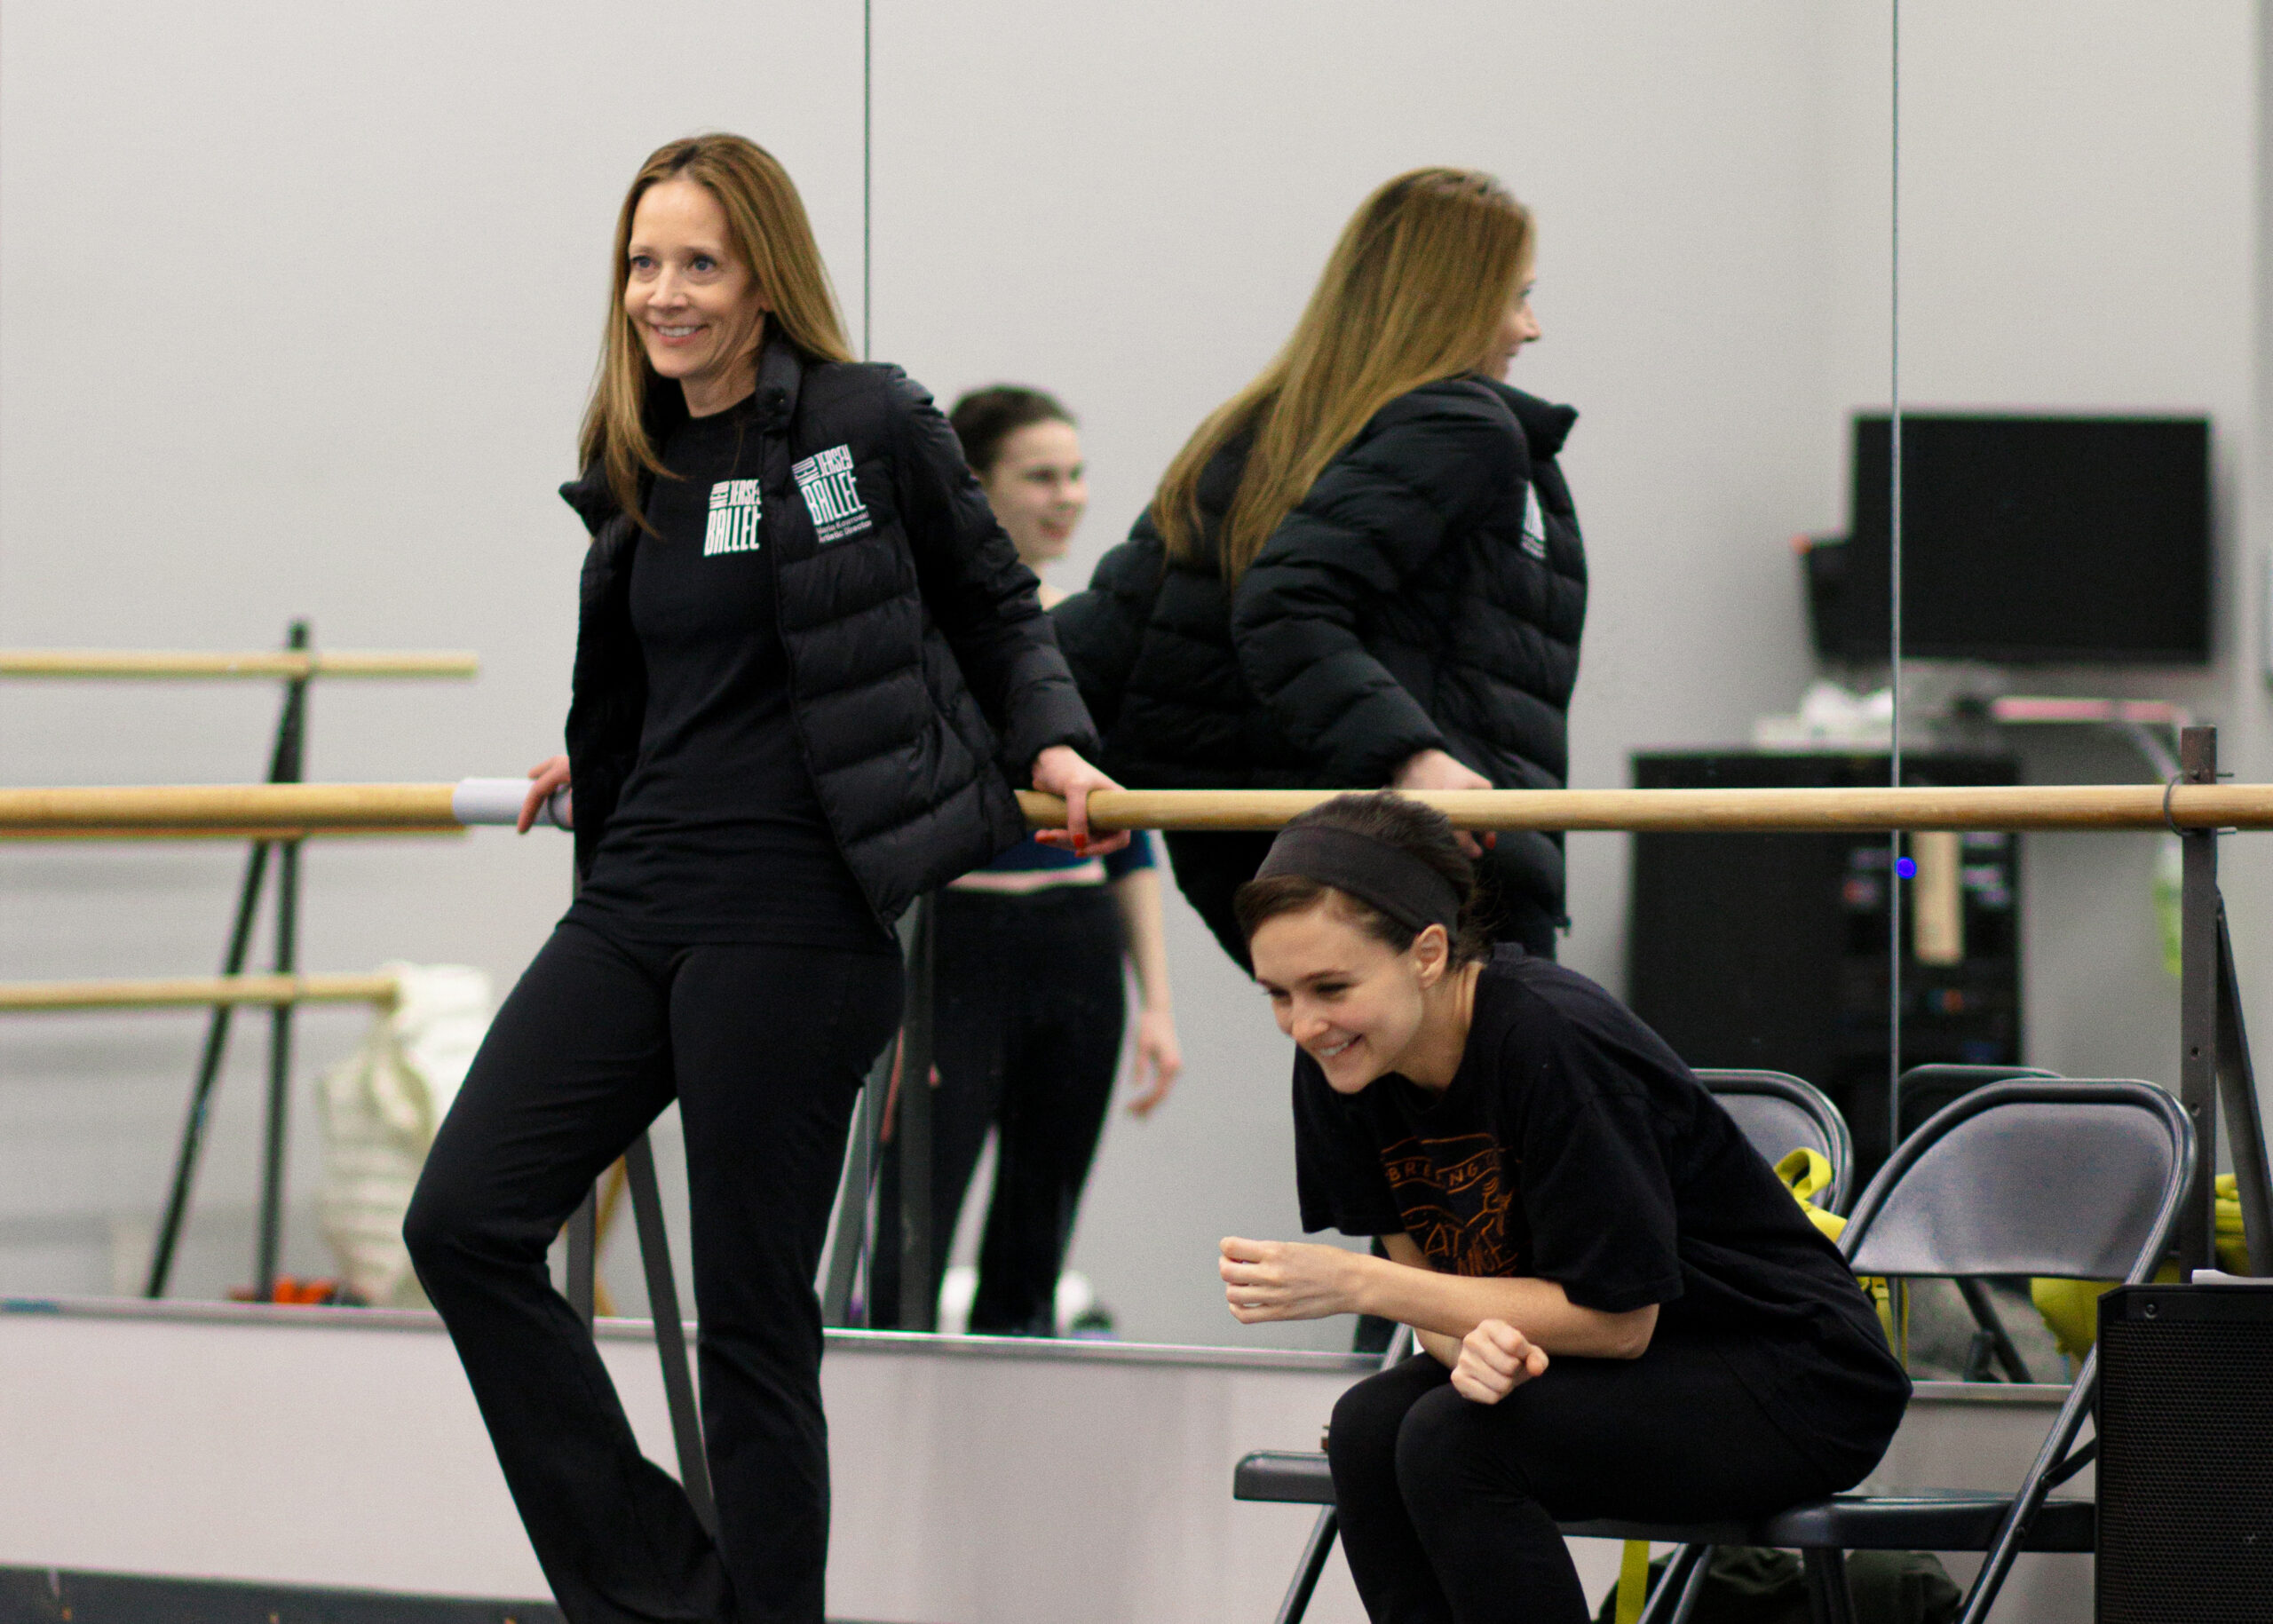 Maria Kowroski, wearing black yoga pants, a black shirt and a puffy black vest, leans against a ballet barre in a dance studio, her back facing the mirror. Next to her on her left, Lauren Lovette, in a black t-shirt and black yoga pants, sits in a gray fold-out chair, leaning forward with her forearms resting on her thighs, and smiles. A female dancer is seen in the background through the mirror.